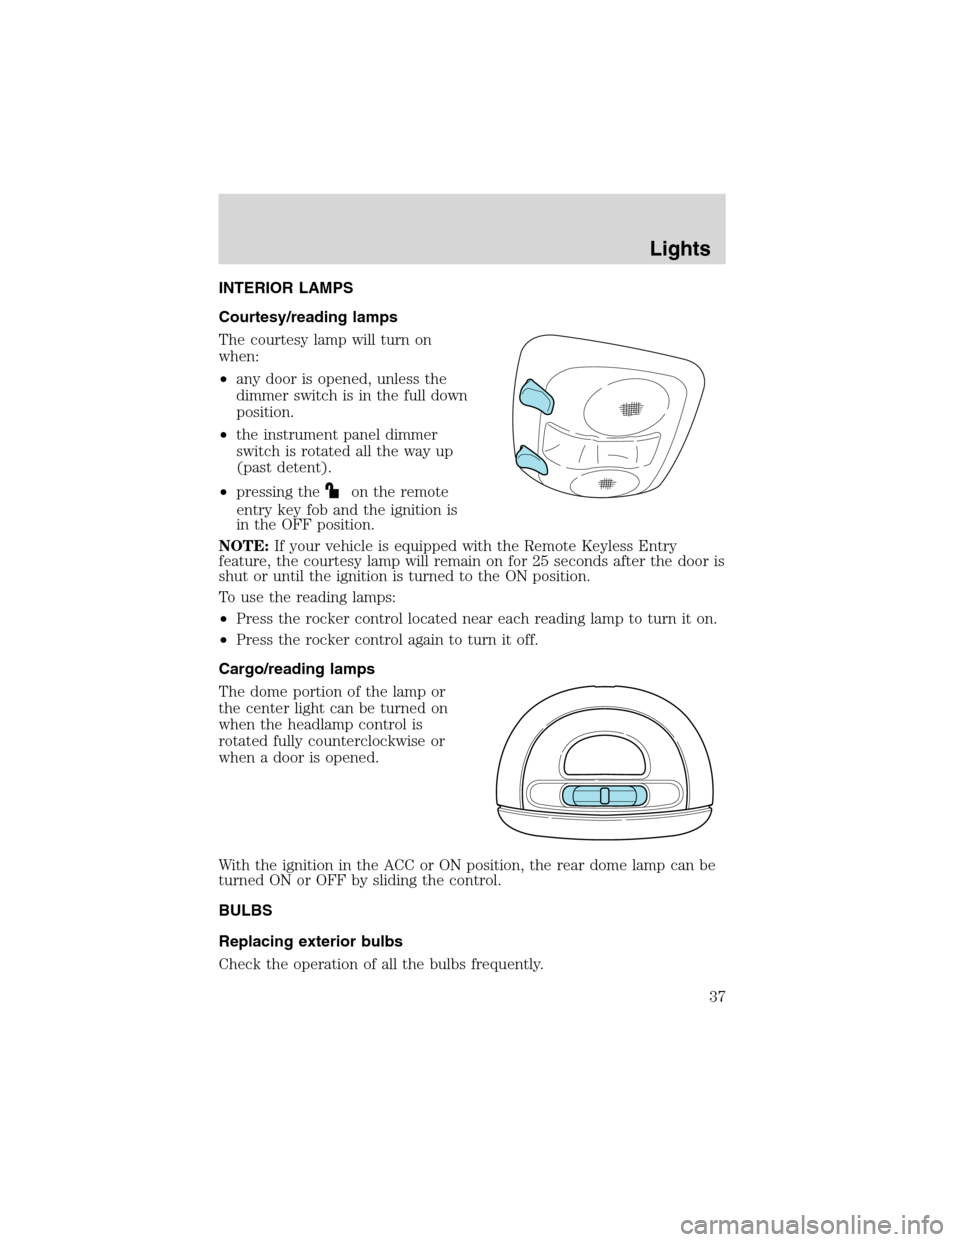 FORD EXPLORER 2003 3.G Owners Guide INTERIOR LAMPS
Courtesy/reading lamps
The courtesy lamp will turn on
when:
•any door is opened, unless the
dimmer switch is in the full down
position.
•the instrument panel dimmer
switch is rotate